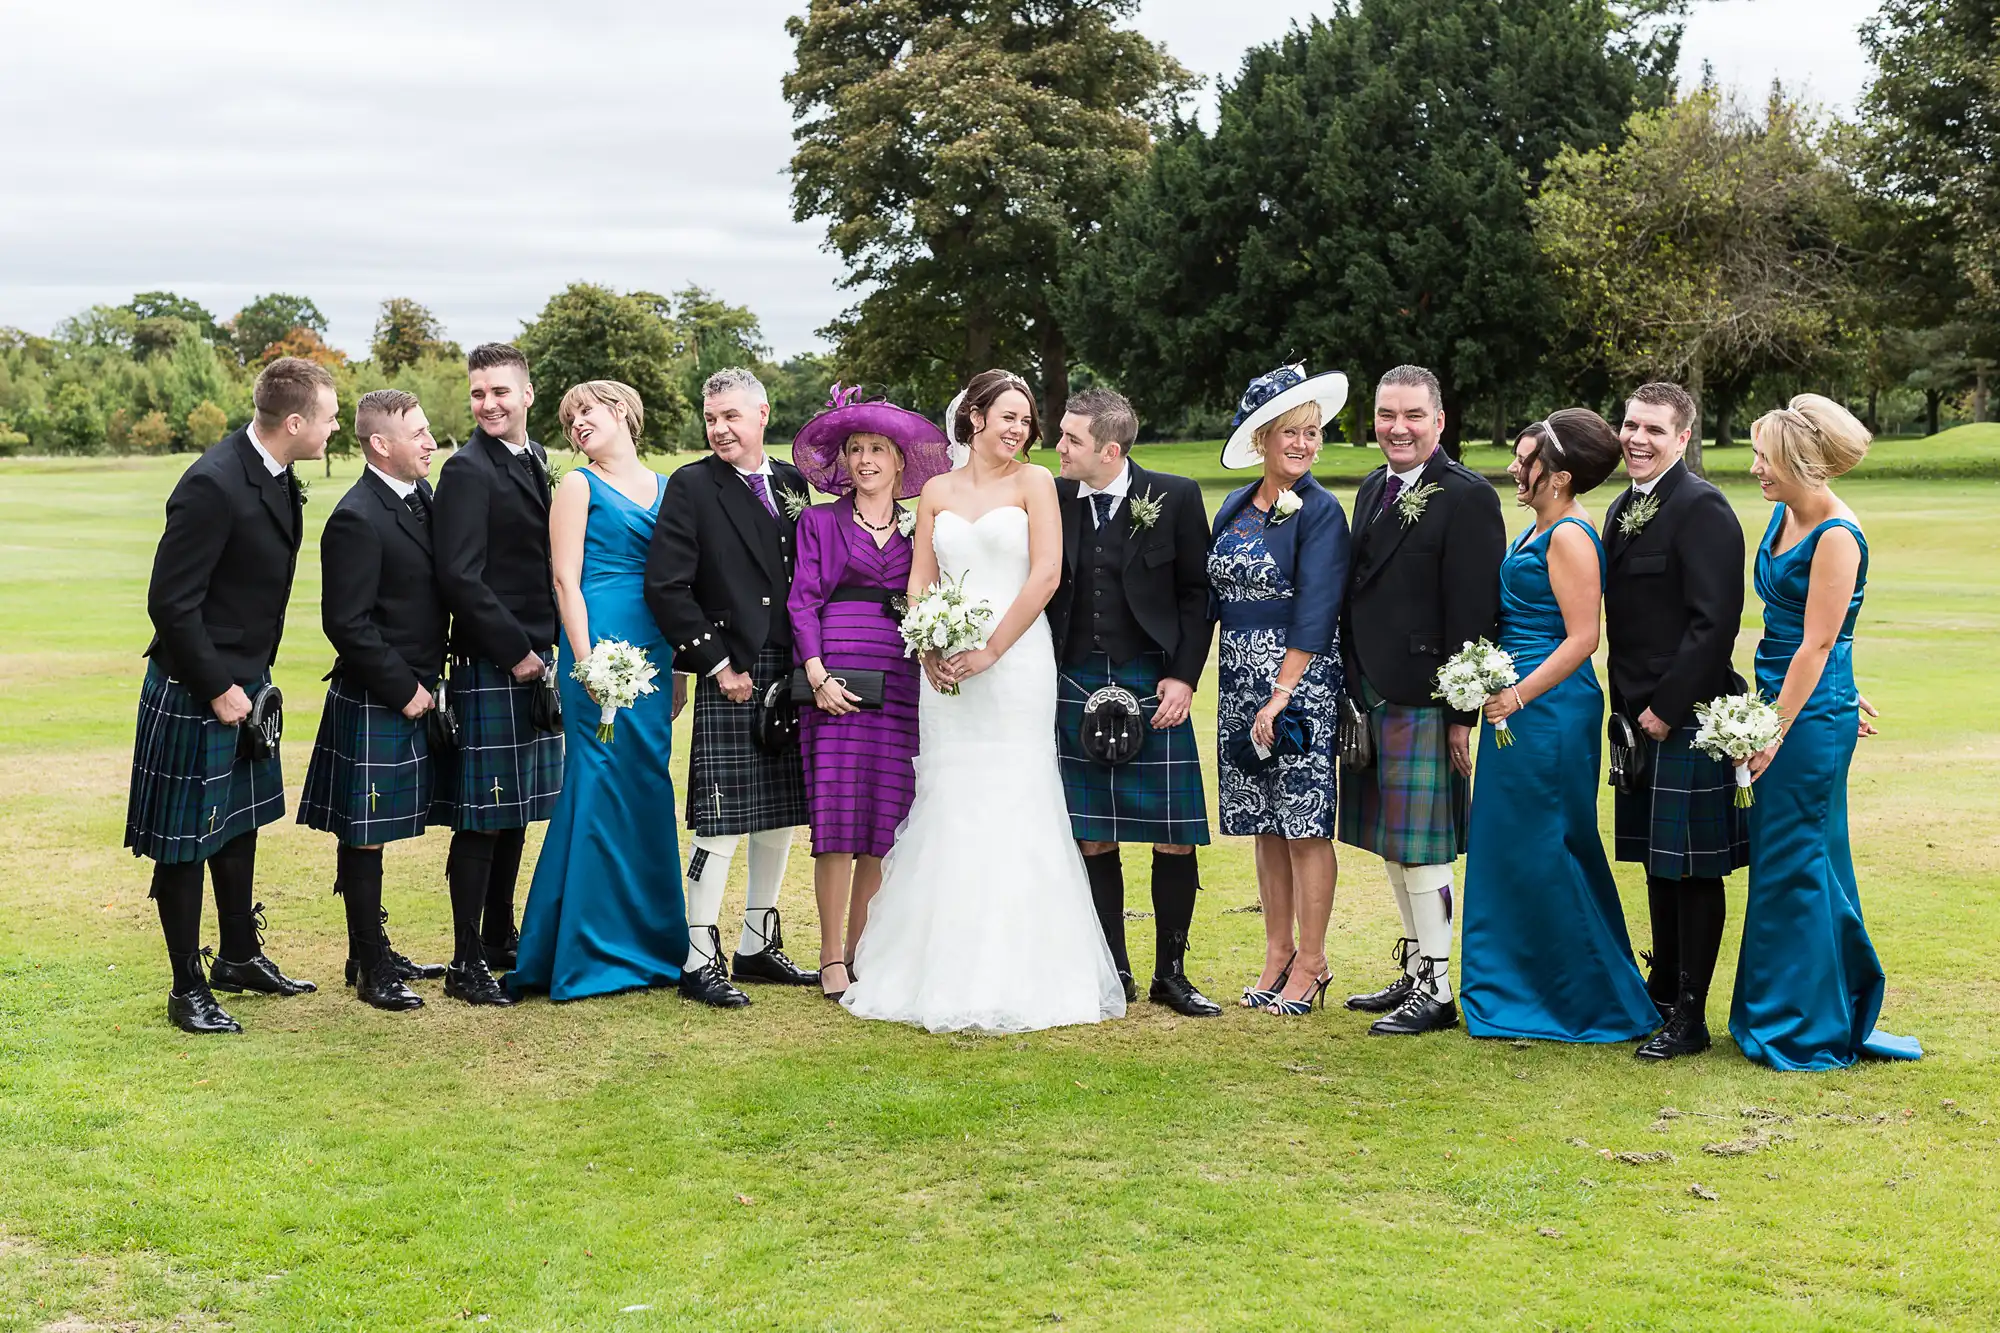 A wedding group in formal attire with kilts and dresses, smiling outdoors on a grassy field, with some guests looking at each other.